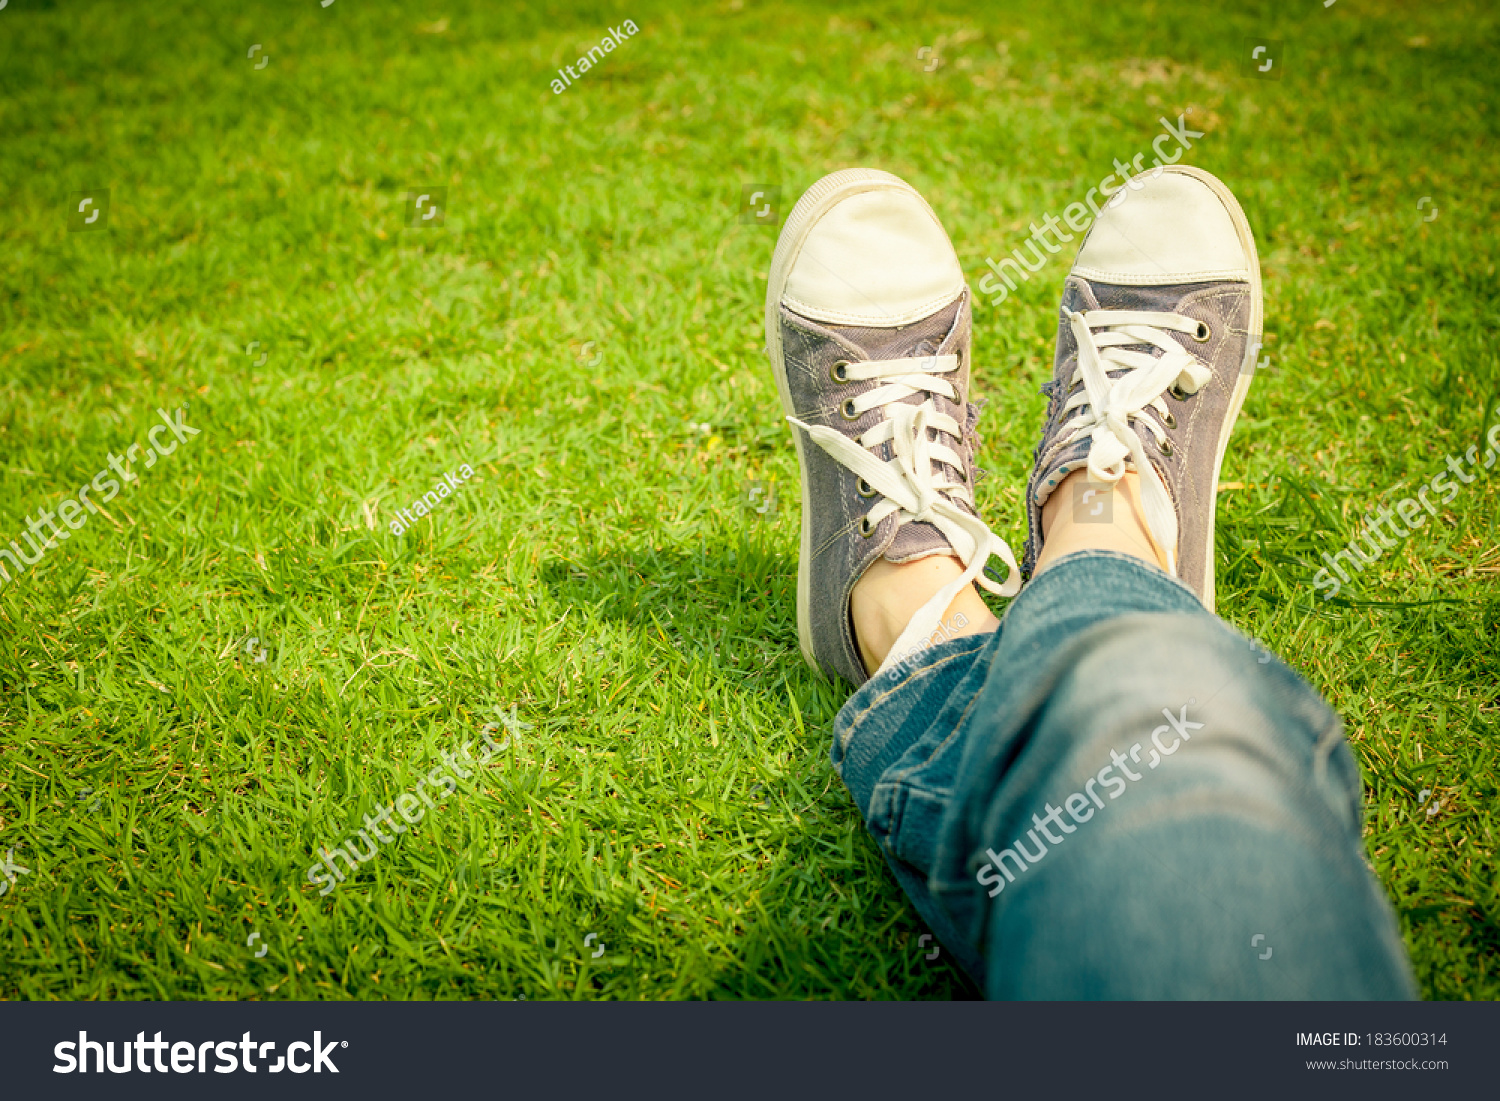 youth sneakers on girl legs on grass during sunny serene summer day. #183600314